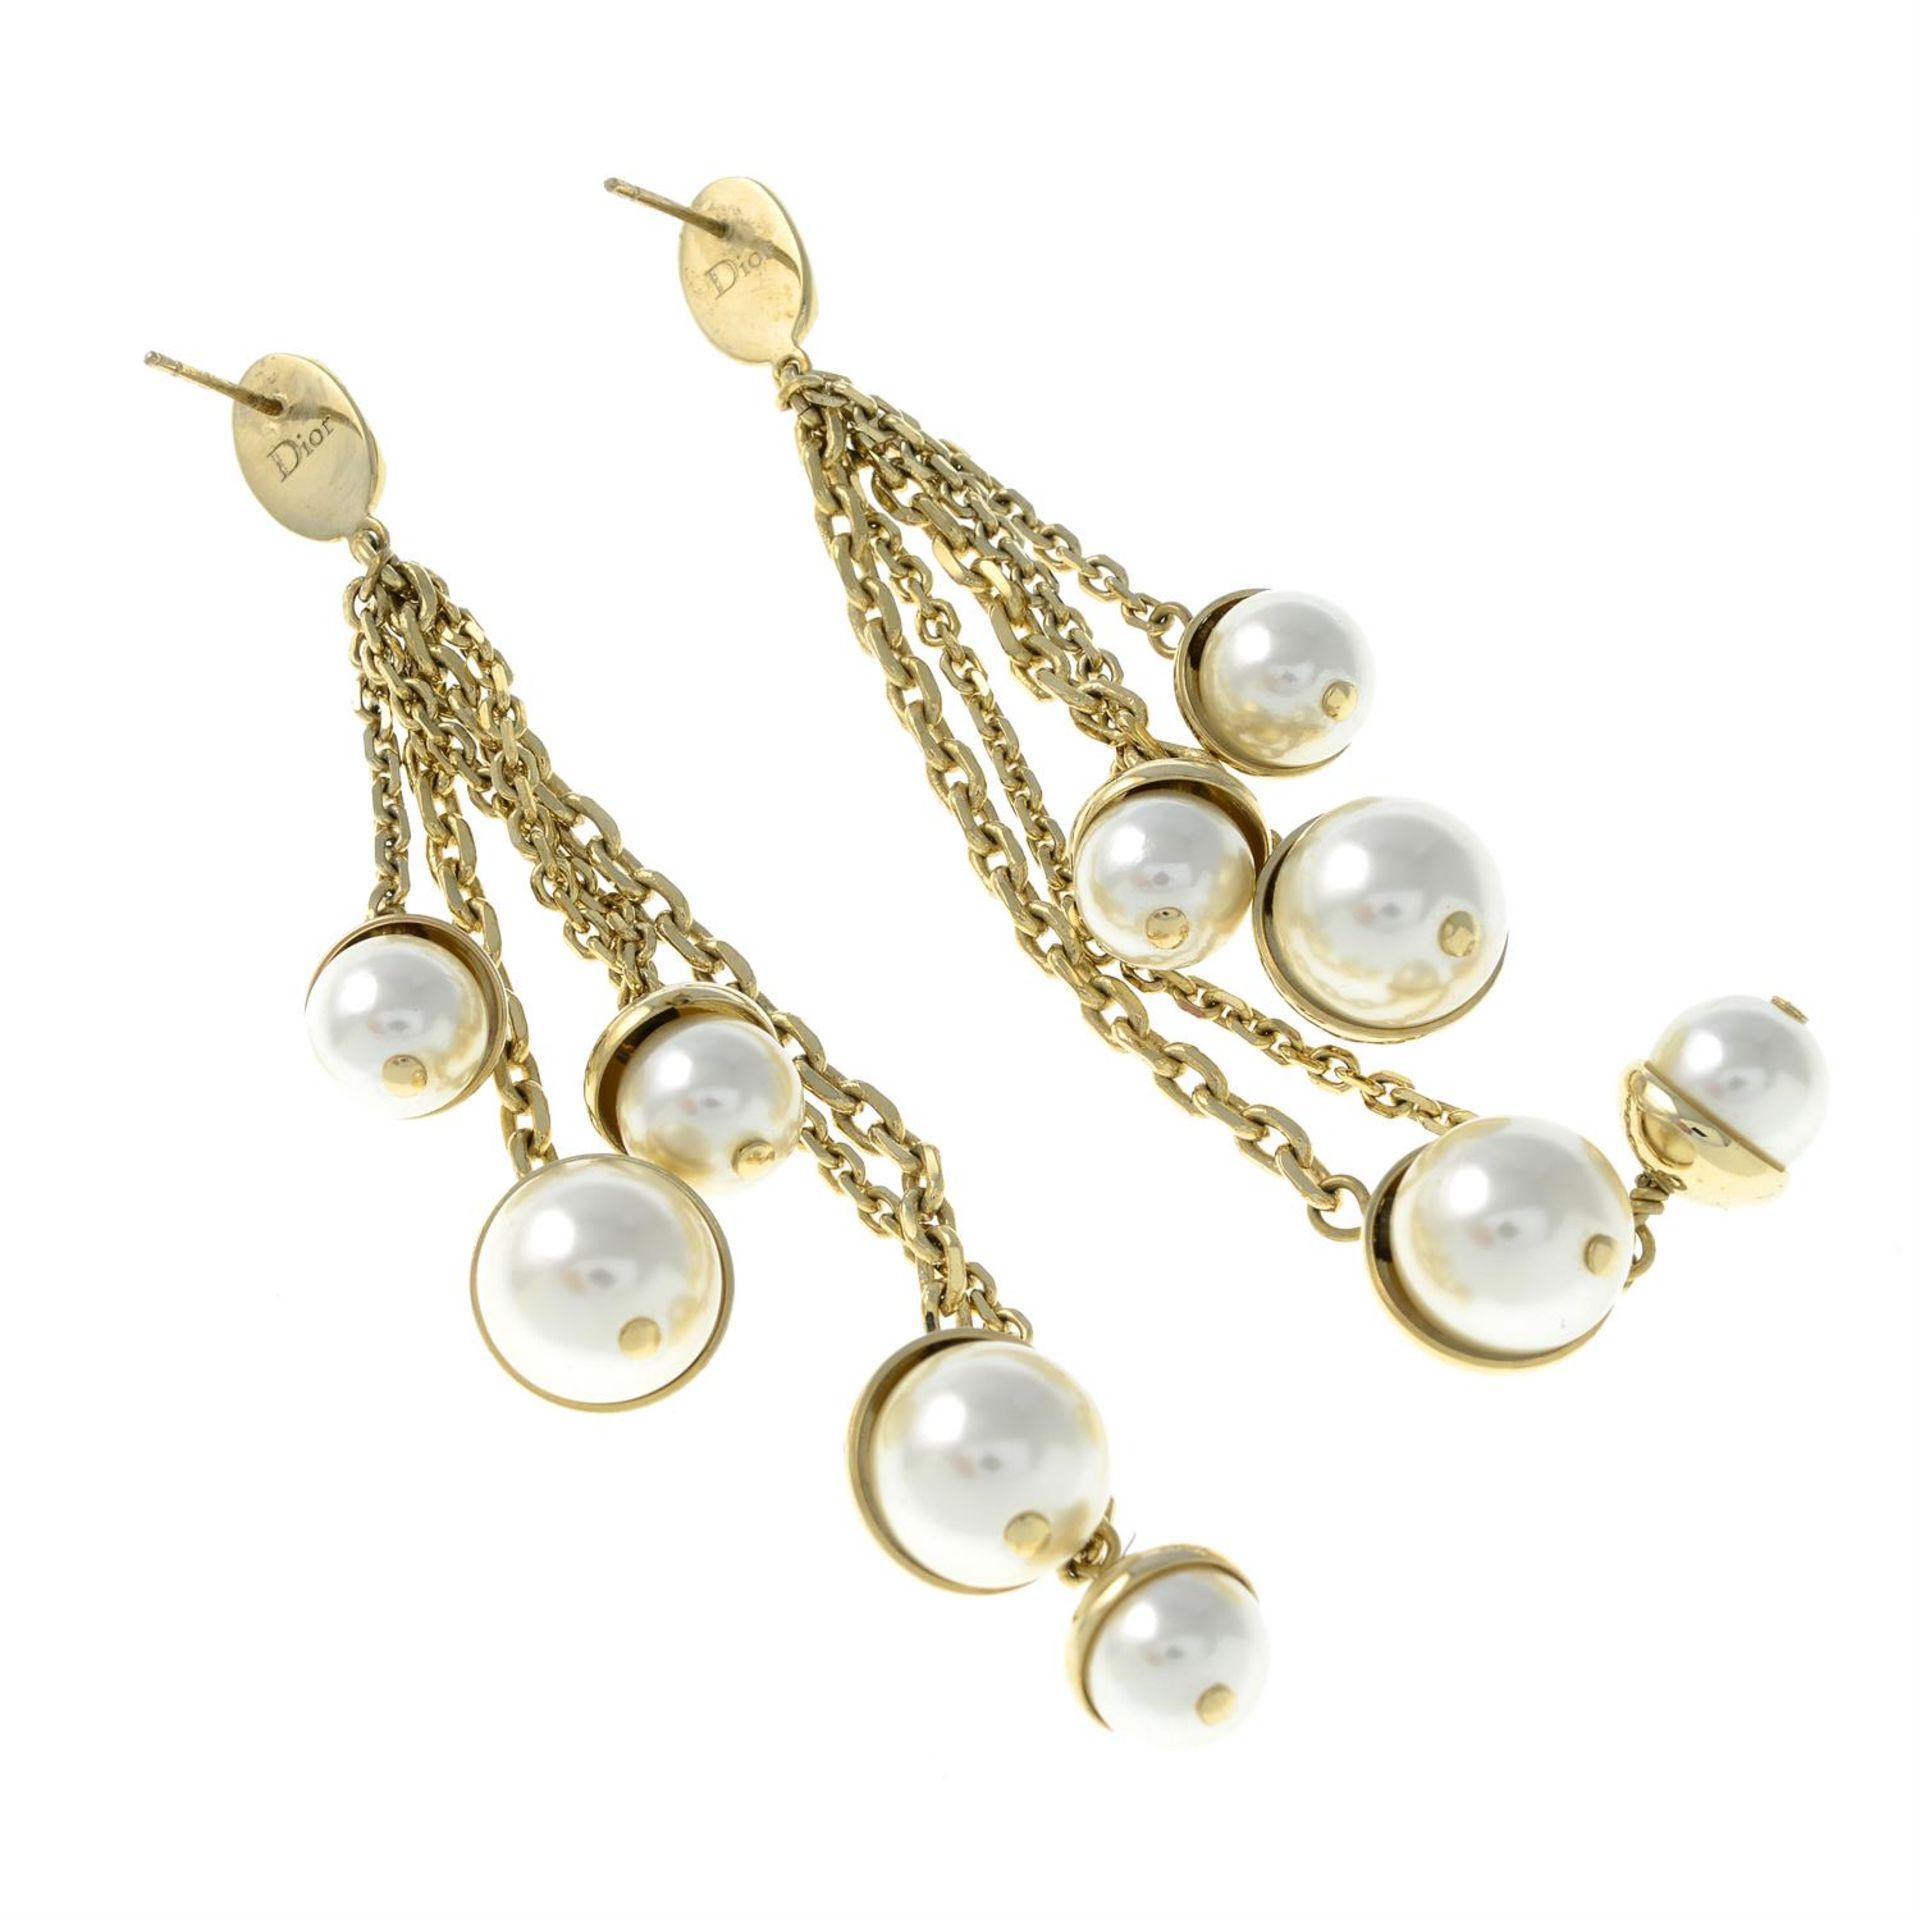 CHRISTIAN DIOR - a pair of imitation pearl drop earrings. - Image 2 of 3